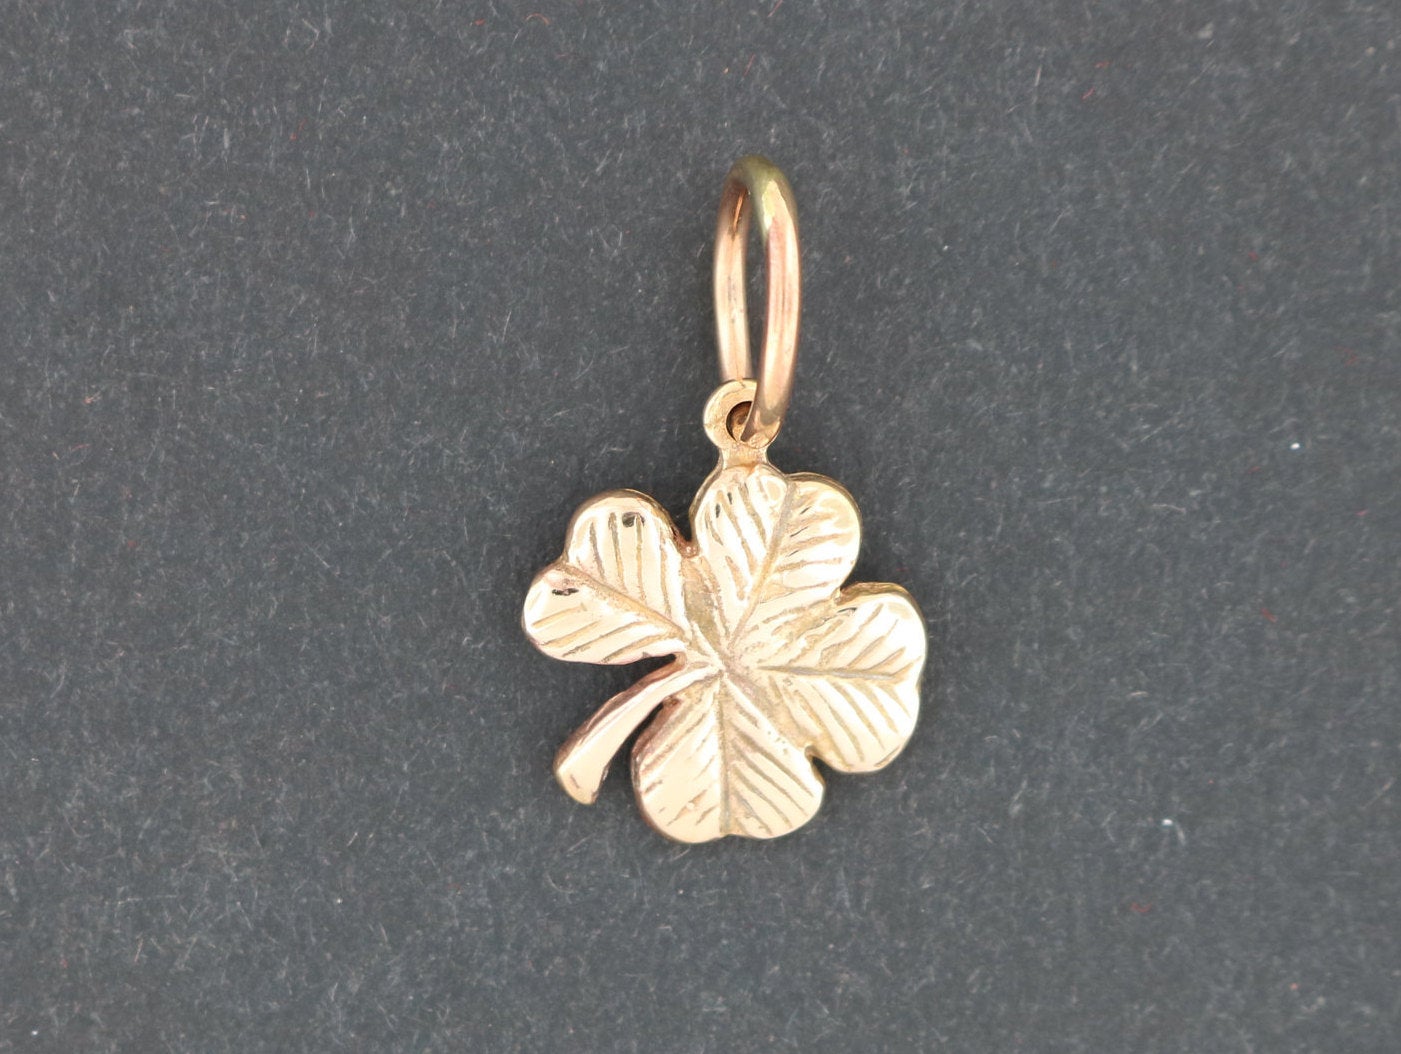 Small Four-Leaf Clover Pendant in Sterling Silver or Antique Bronze